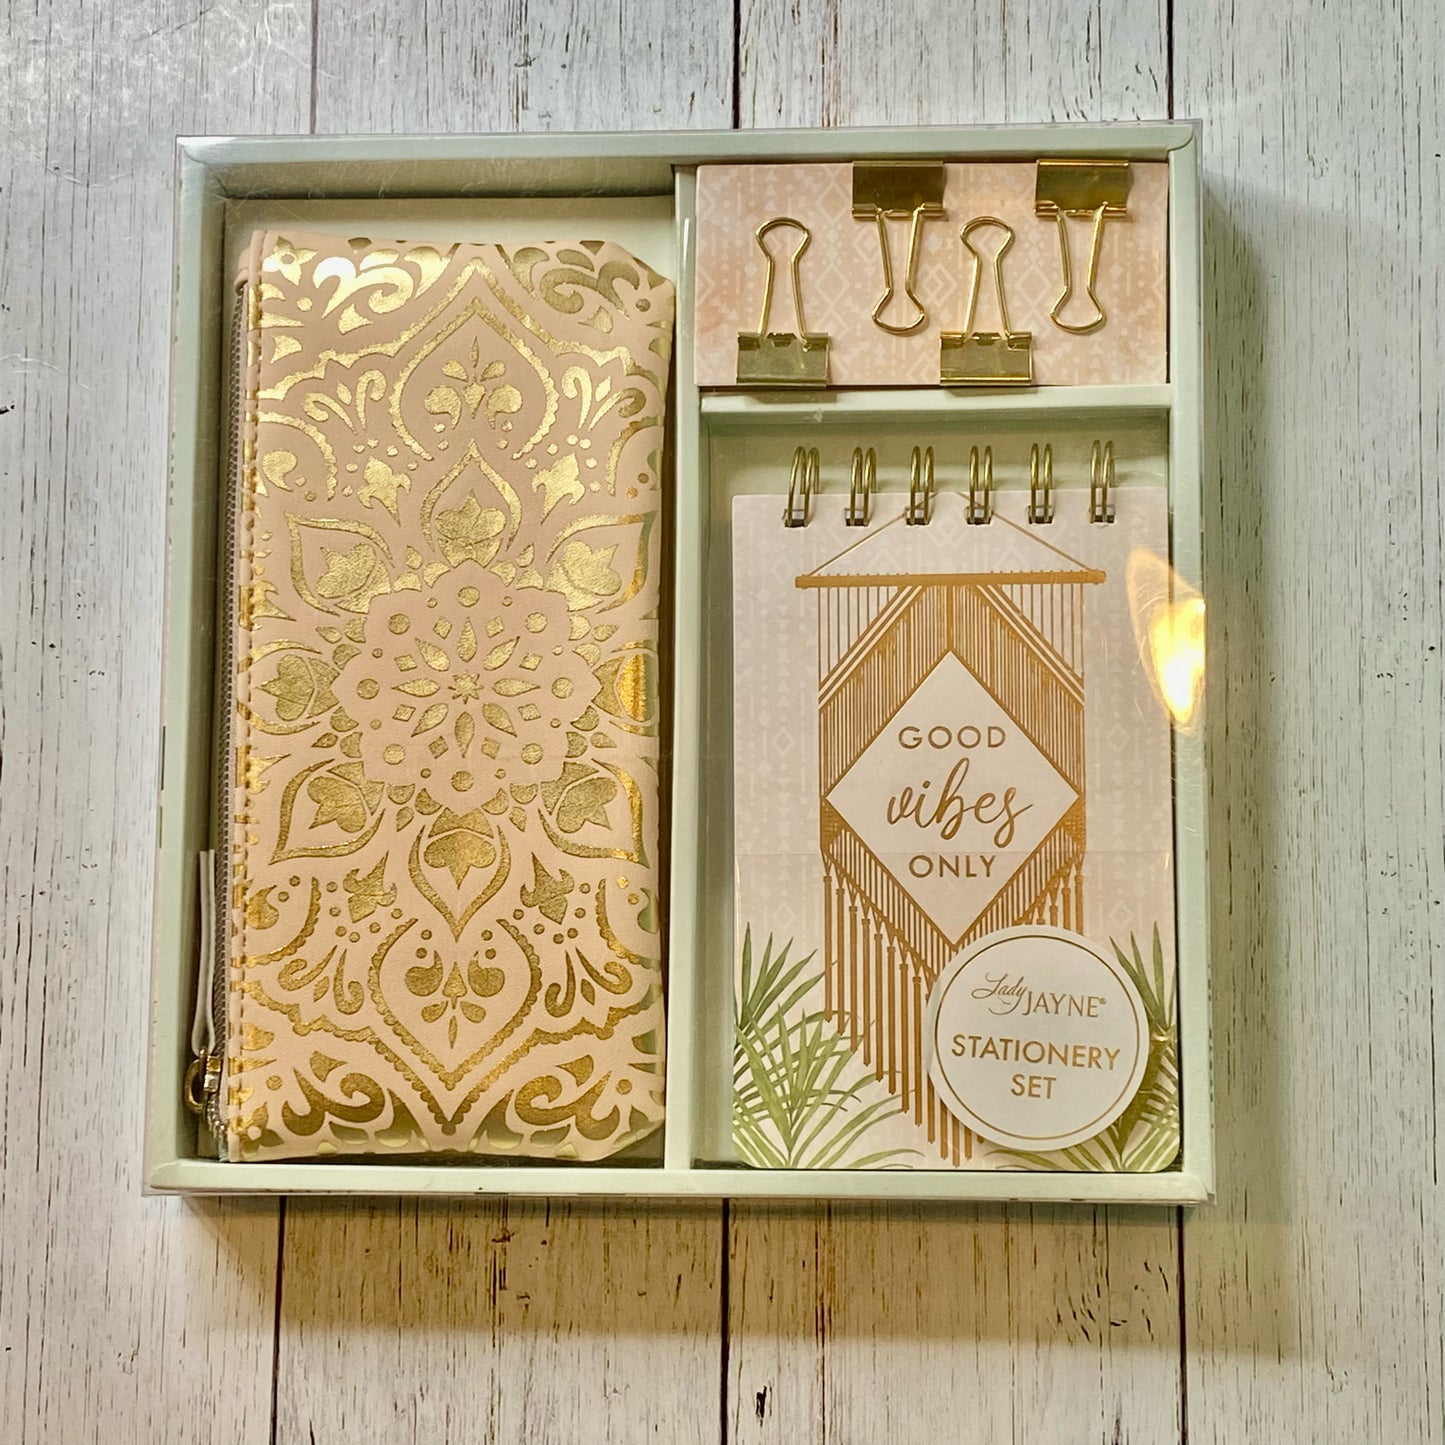 Good Vibes Only Stationery Set